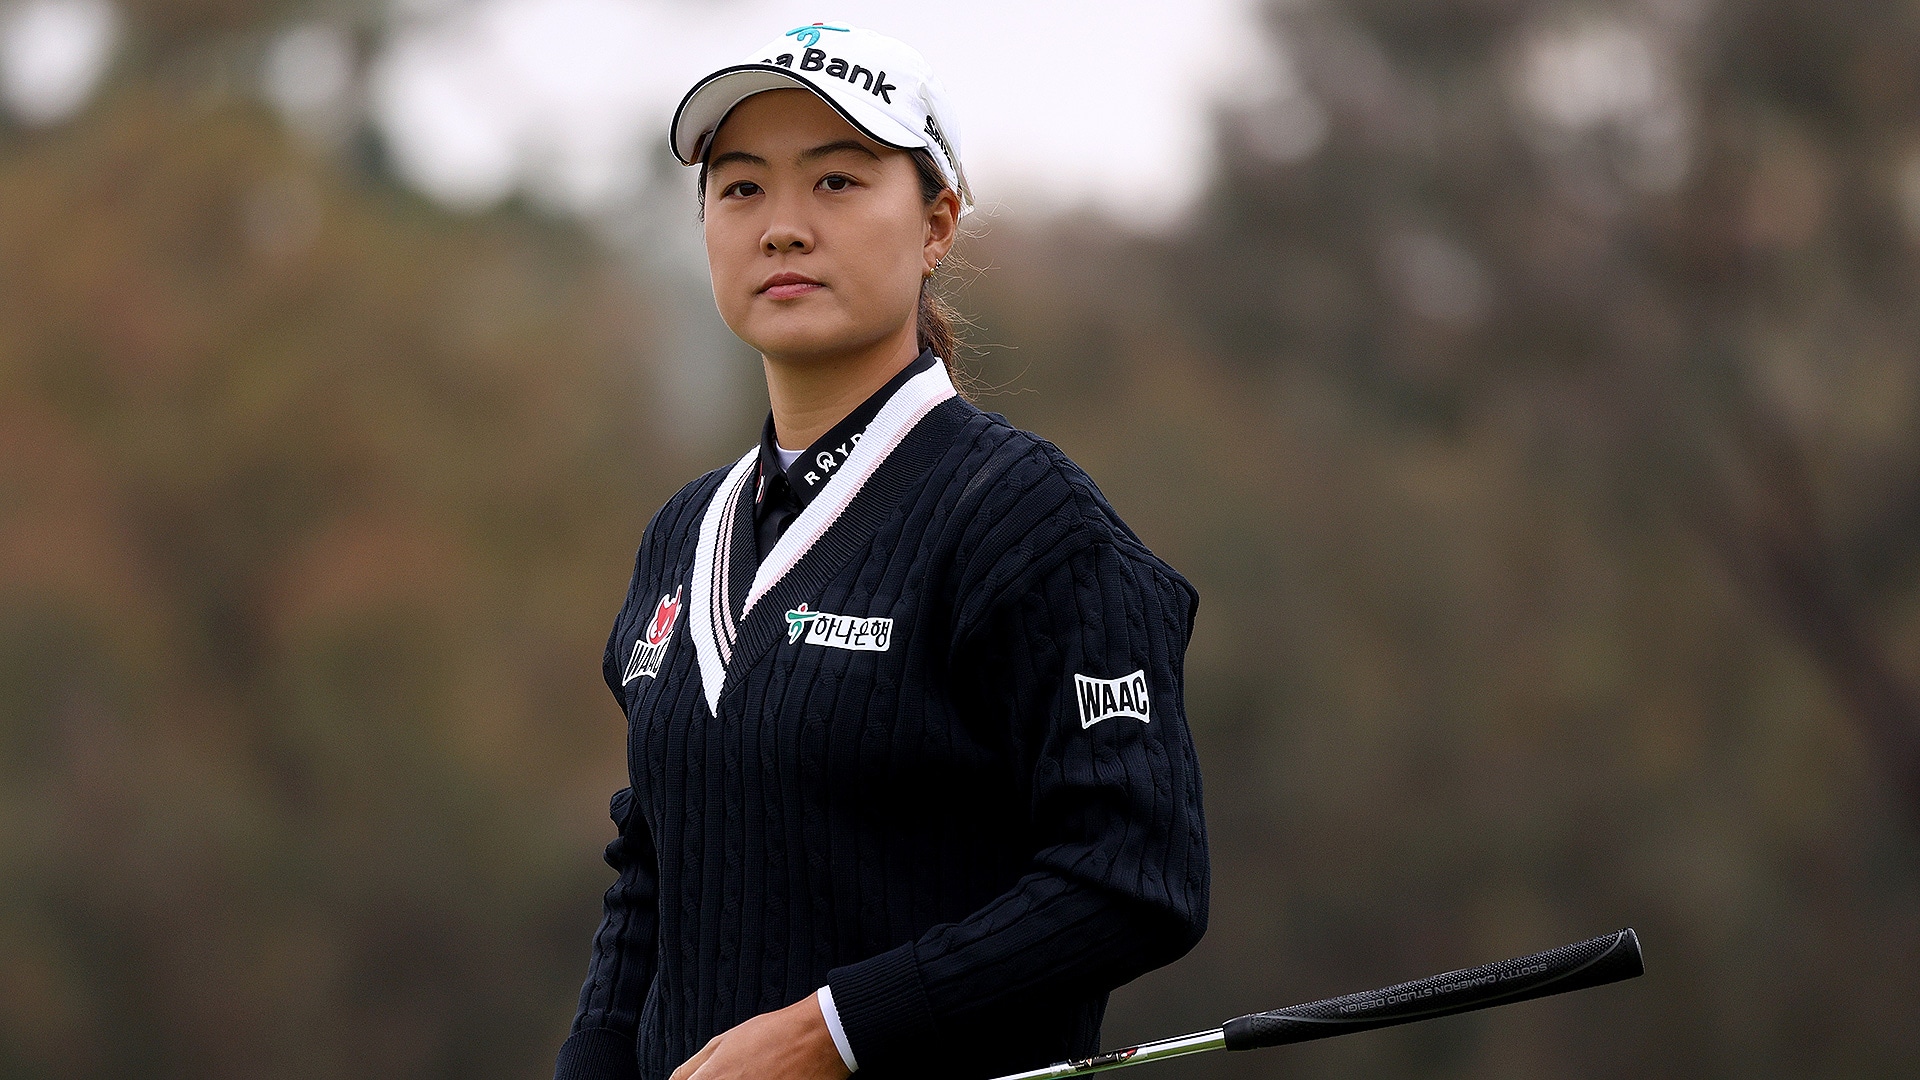 Minjee Lee fires 63 to lead world No. 1 Jin Young Ko at Palos Verdes Championship